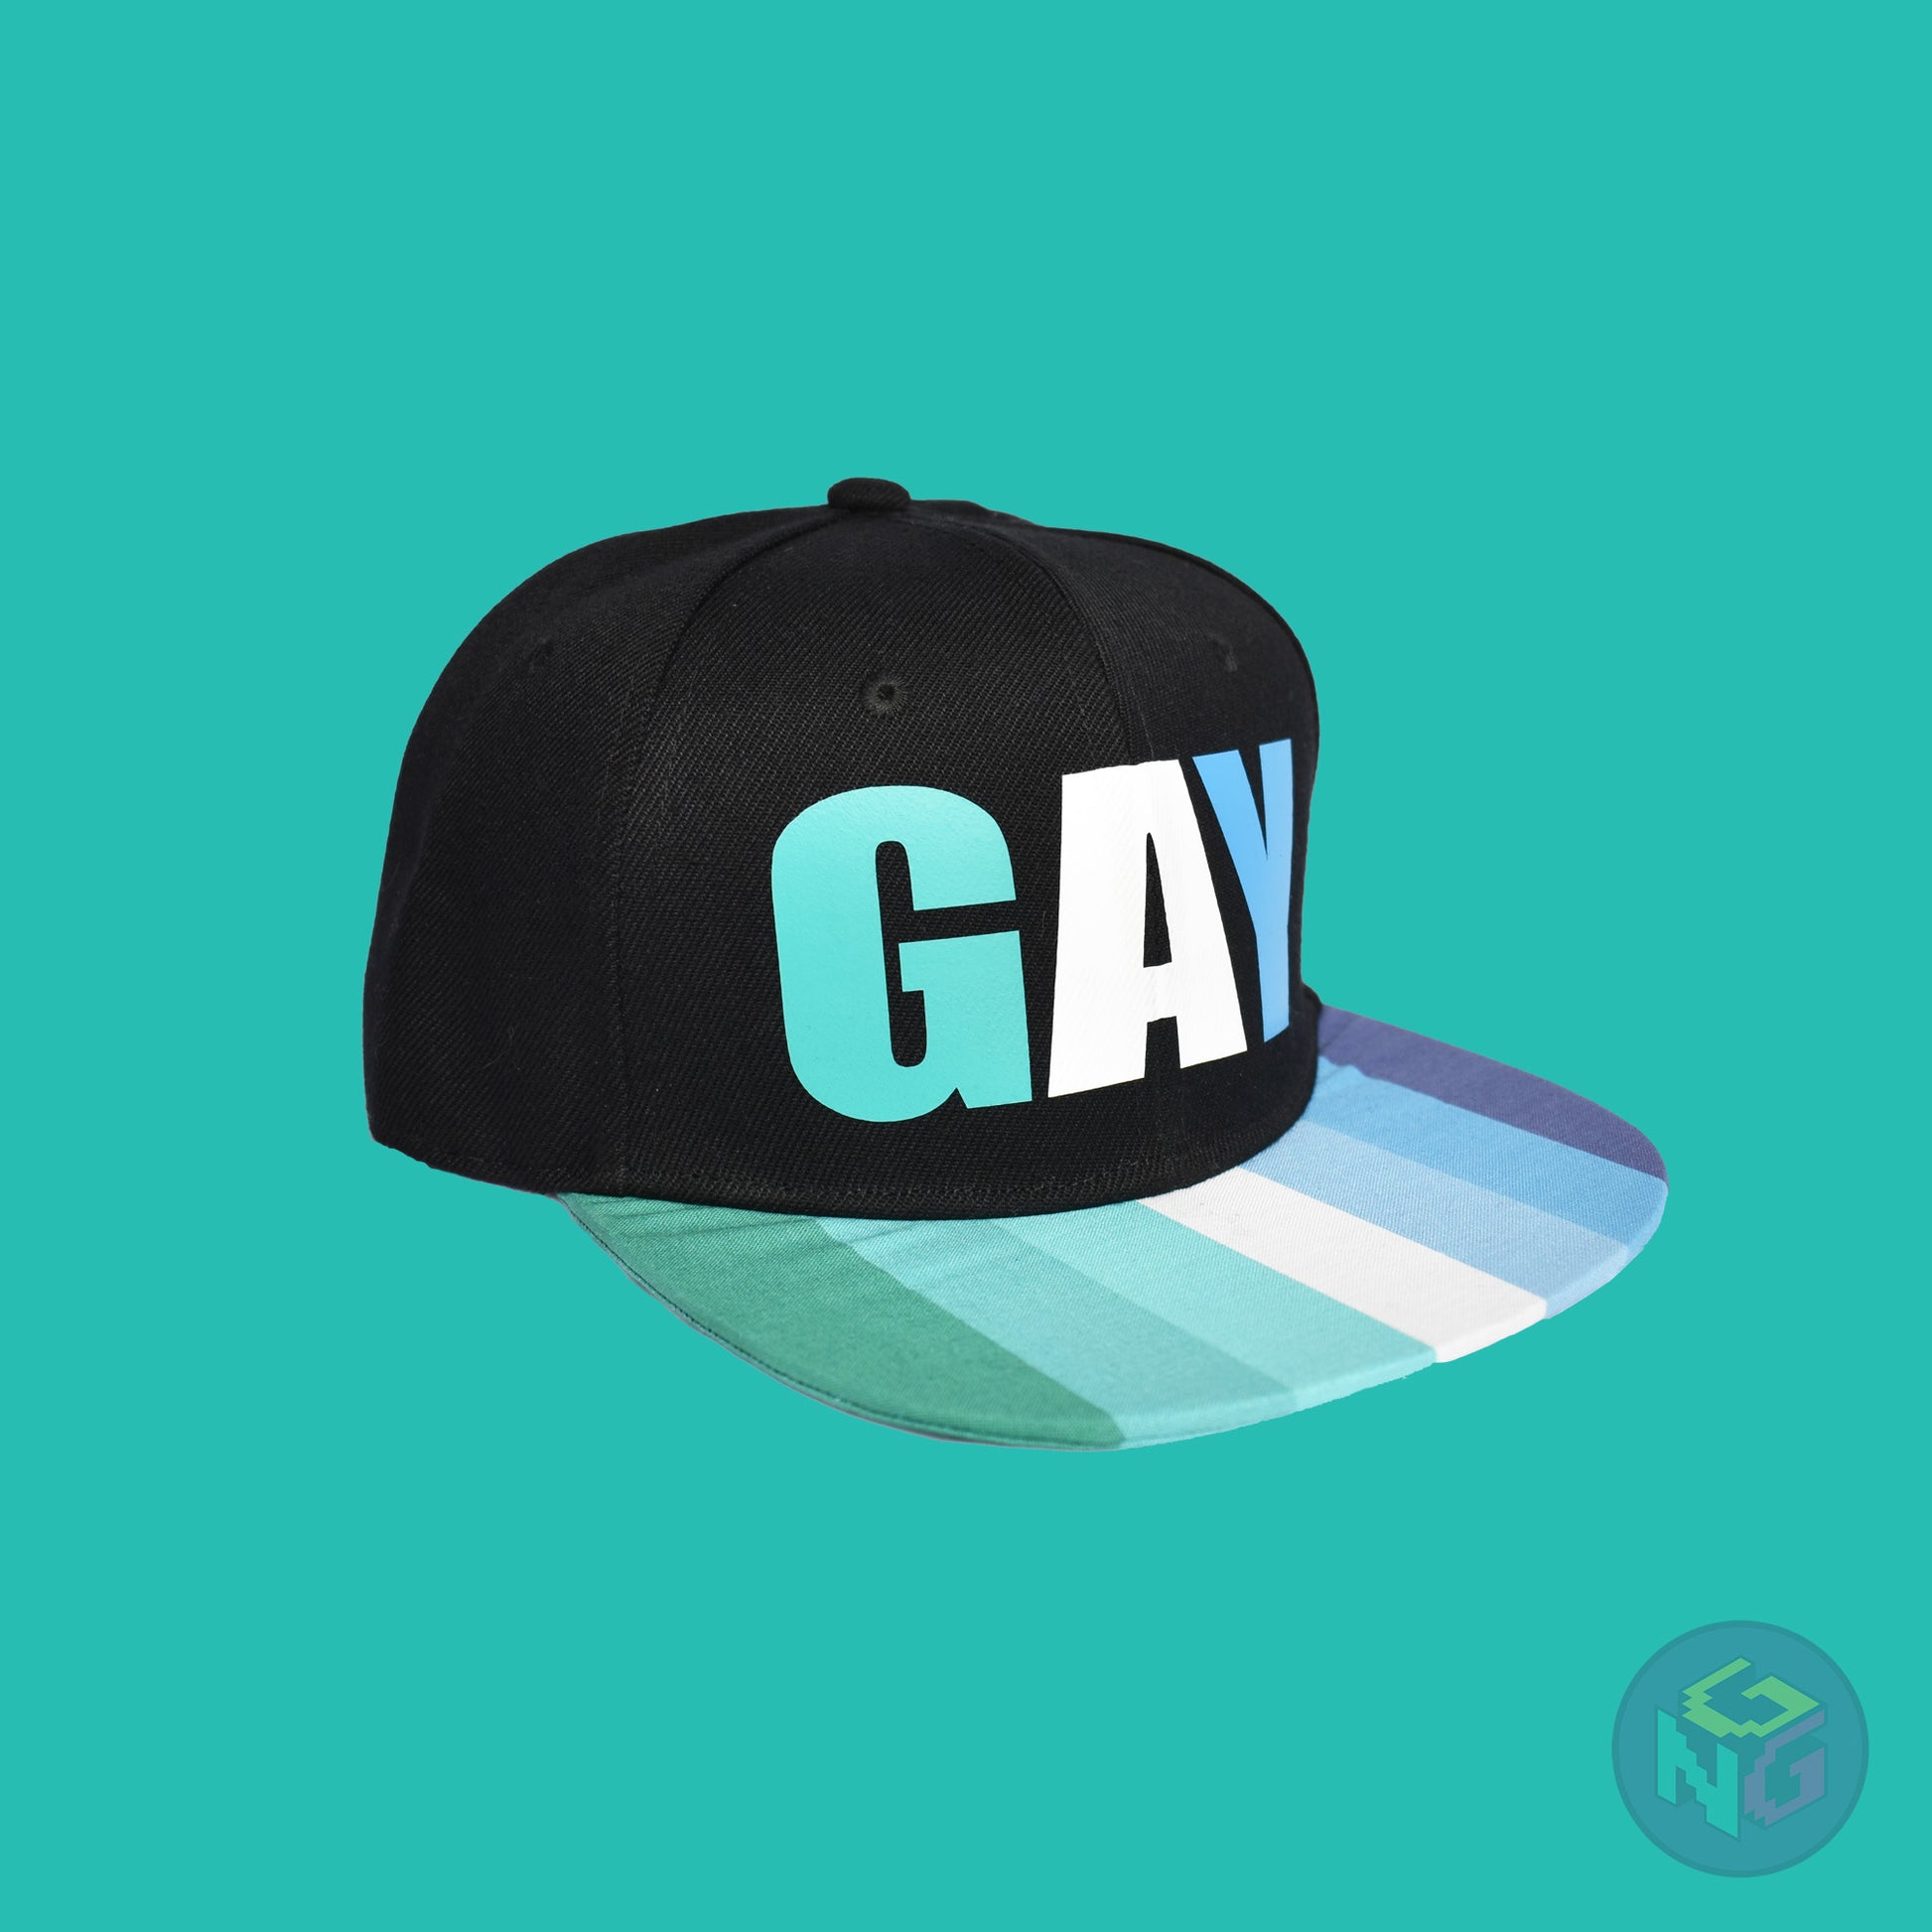 Black flat bill snapback hat. The brim has the gay pride flag on both sides and the front of the hat has the word “GAY” in turquoises, blues, and white. Front right view